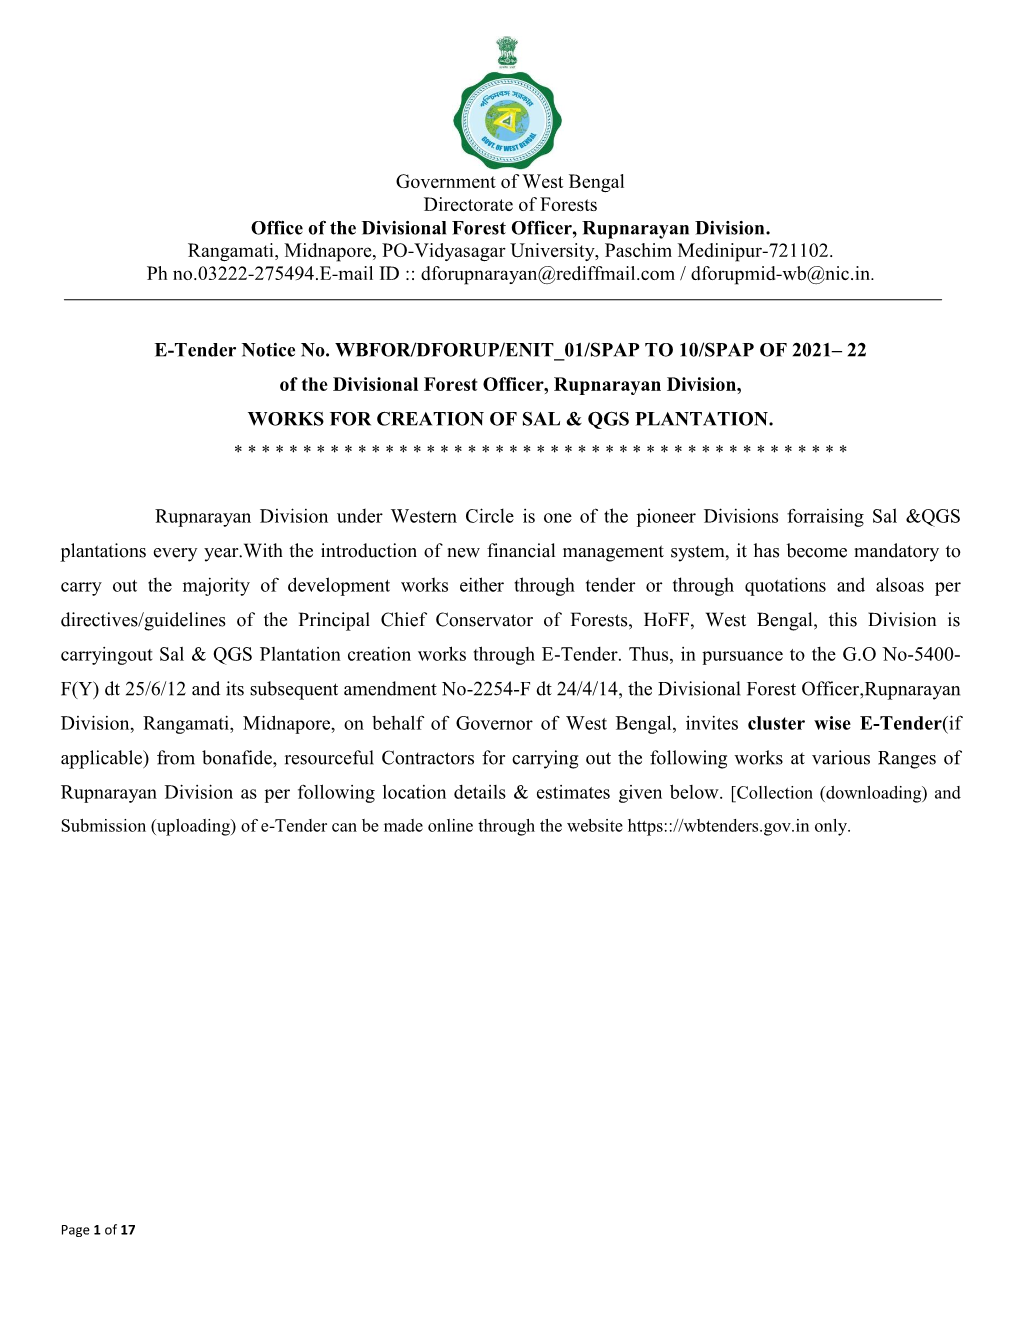 Government of West Bengal Directorate of Forests Office of the Divisional Forest Officer, Rupnarayan Division